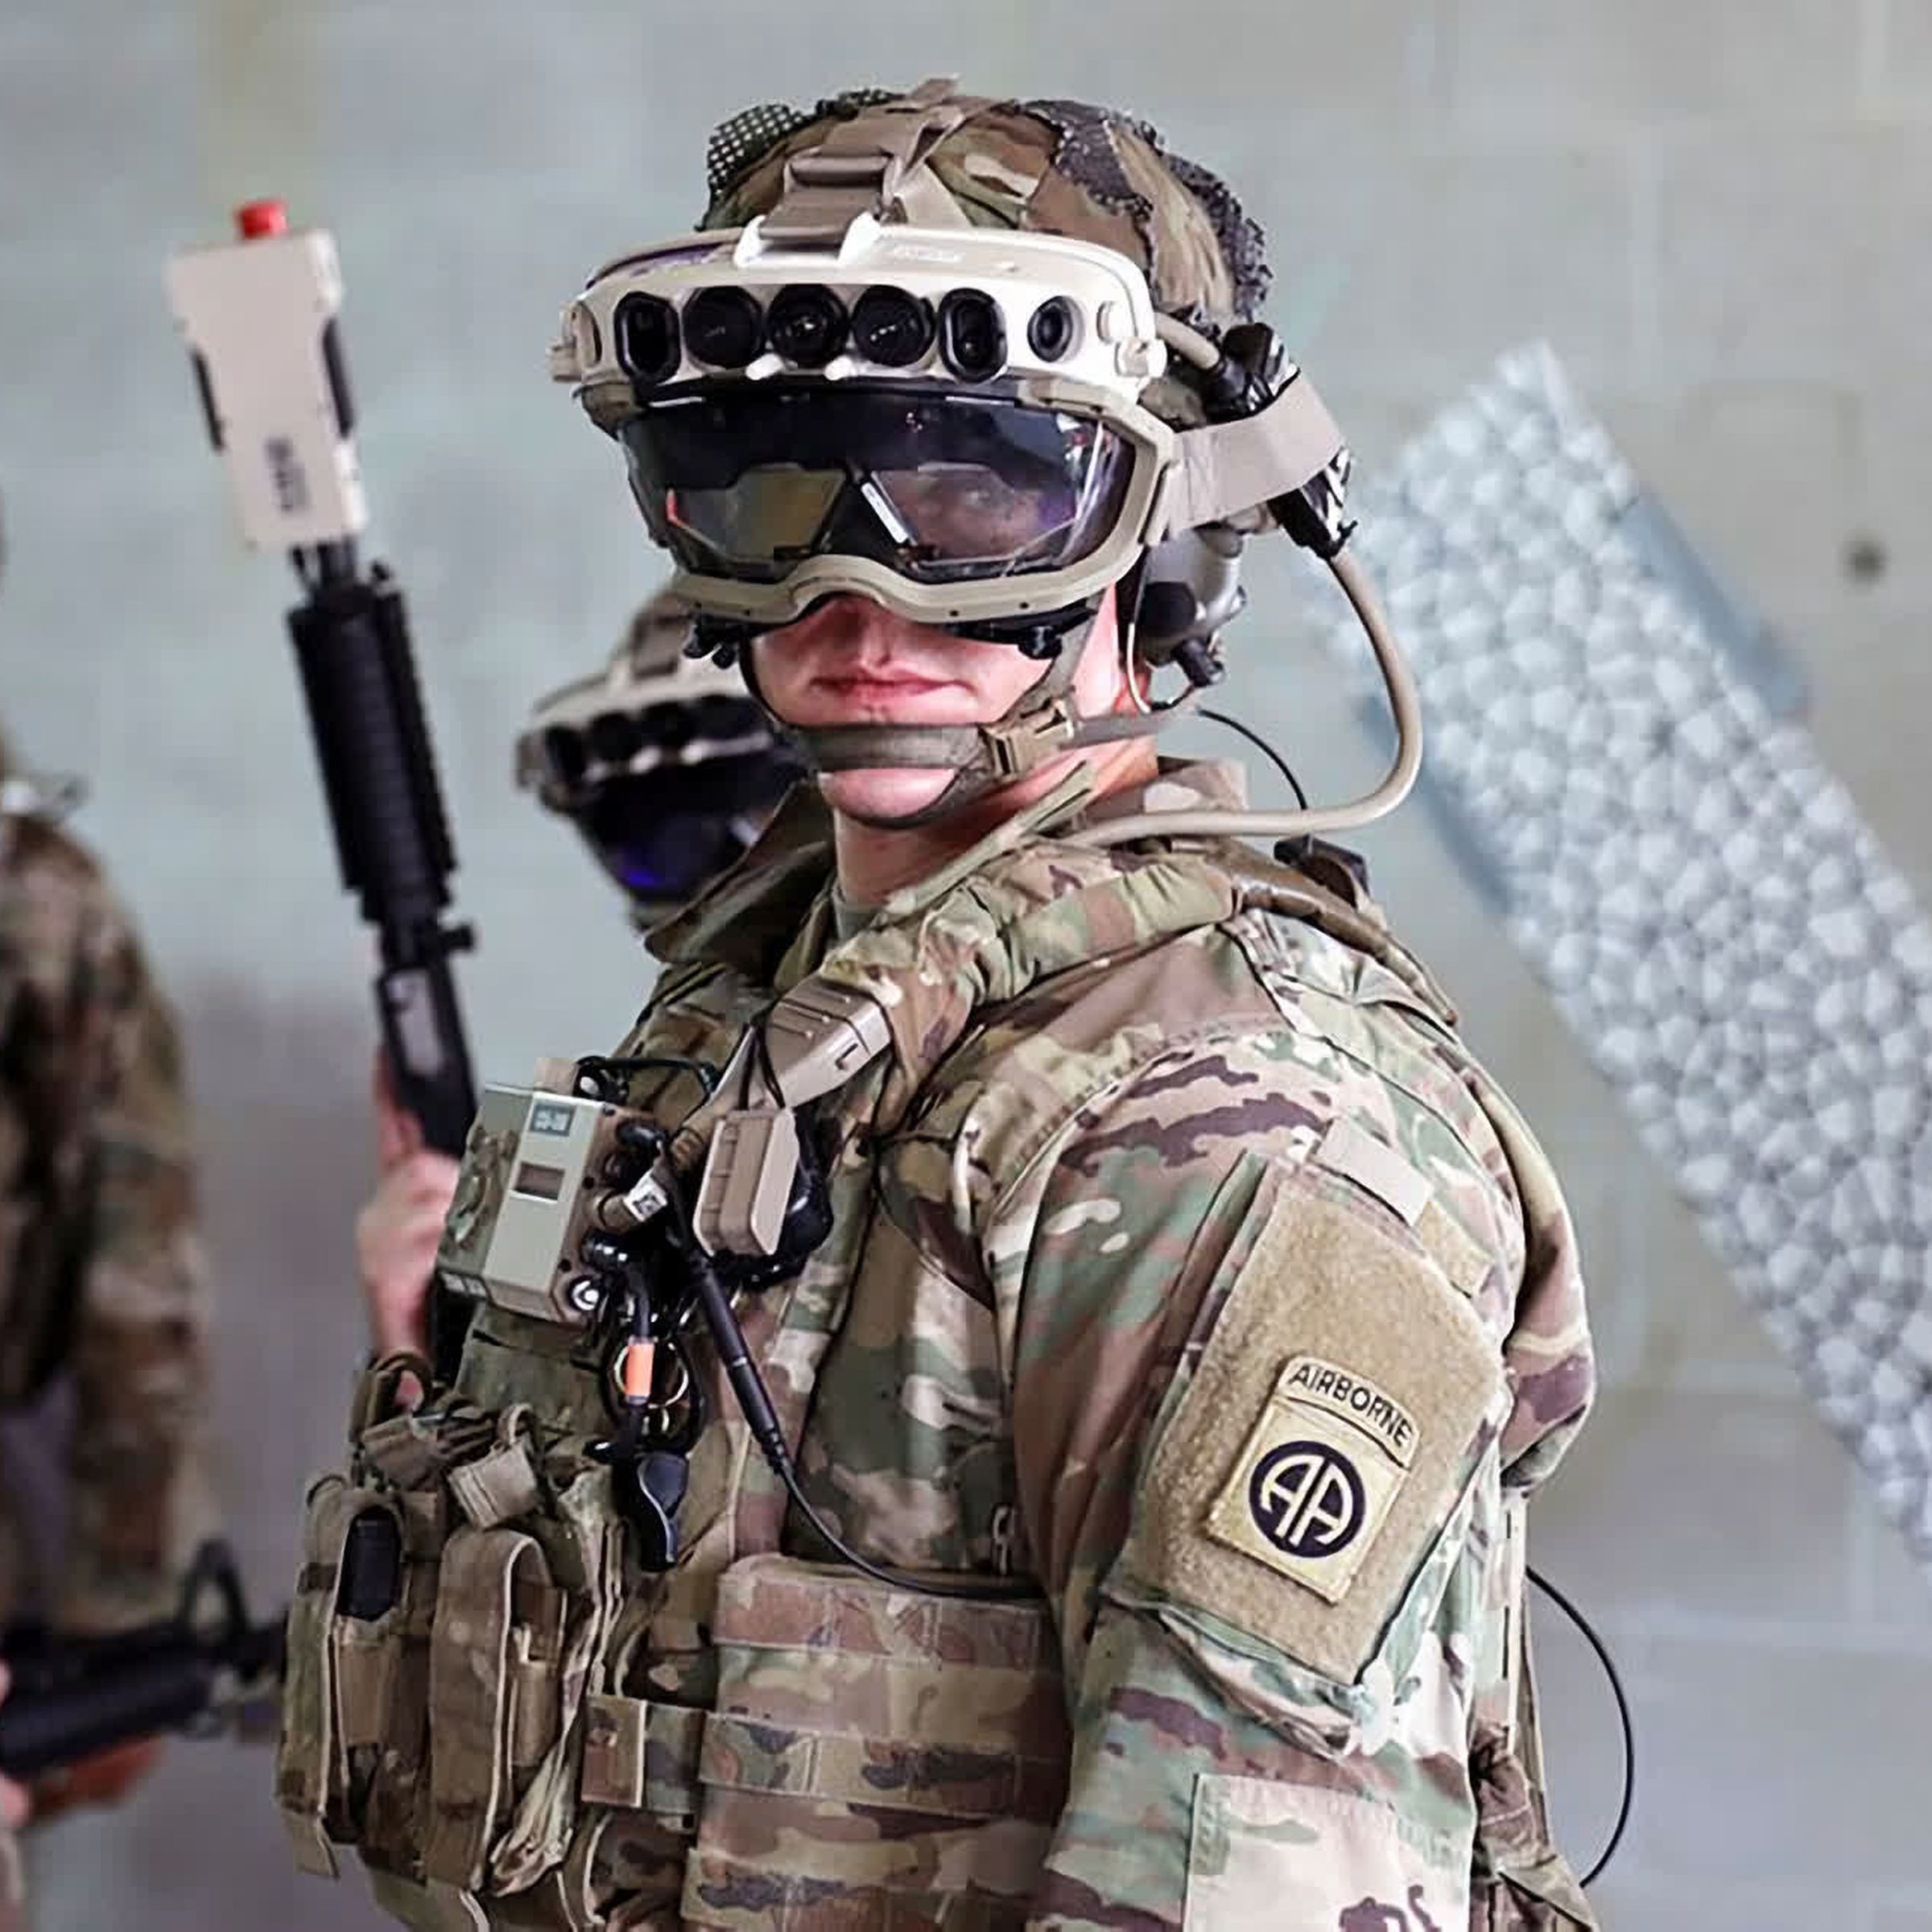 An undated photo shows a US soldier in fatigues wearing a bulky AR headset.